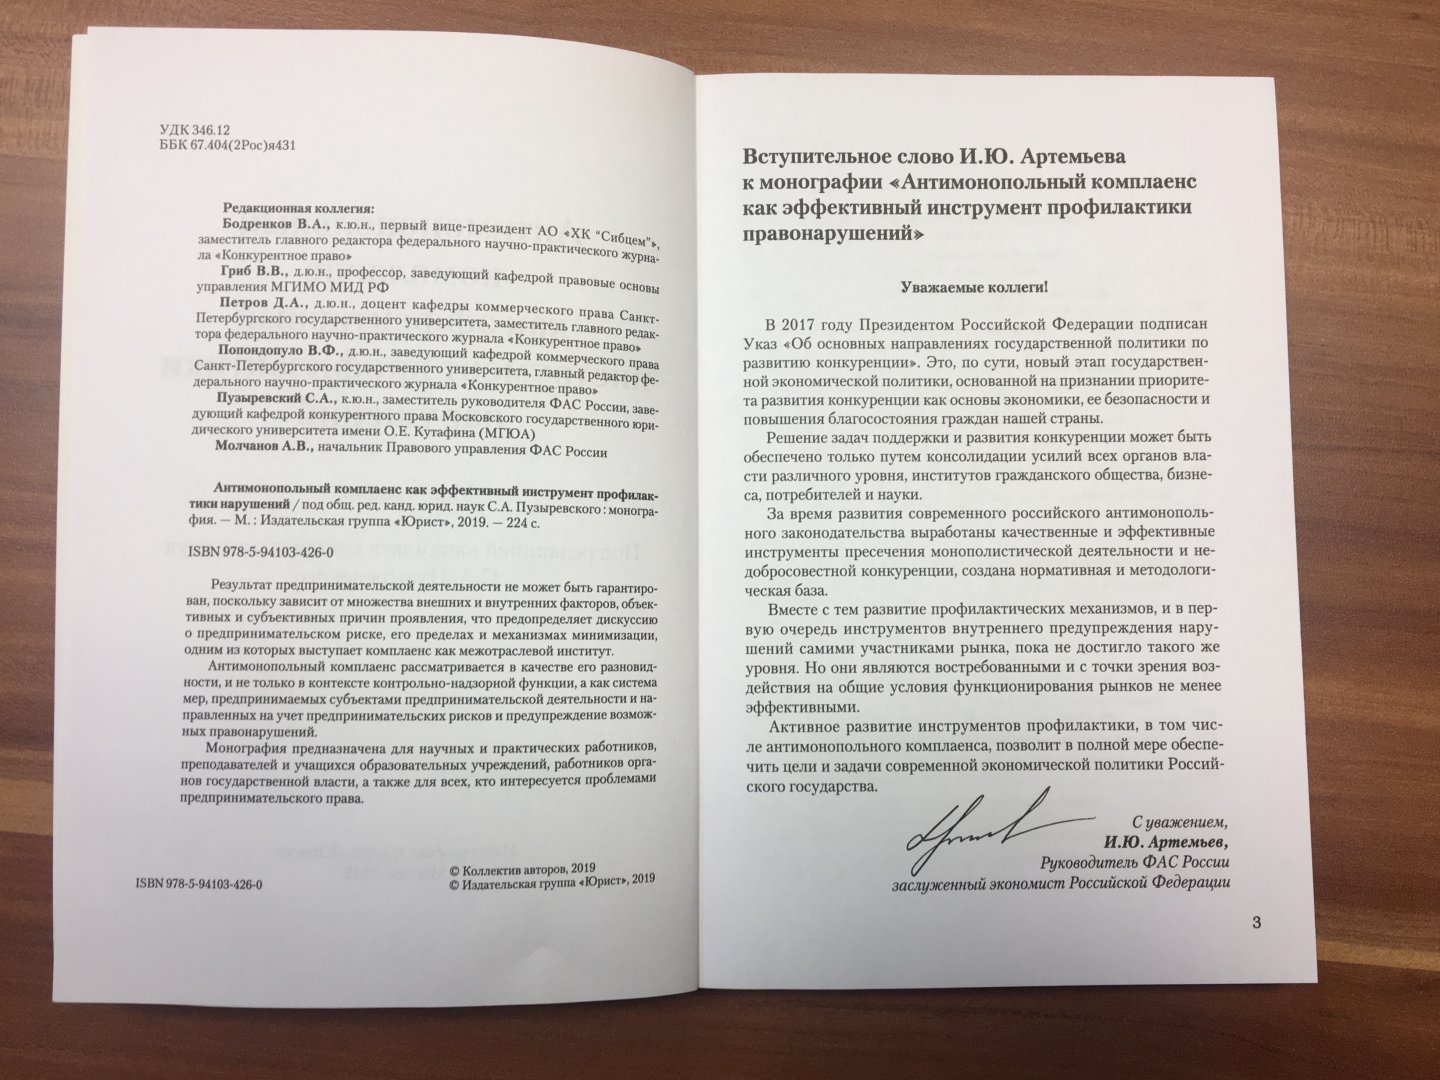 An article by the head of antitrust practice Elena Kuznetsova and senior practice lawyer Viktor Fadeev was included in the monograph 